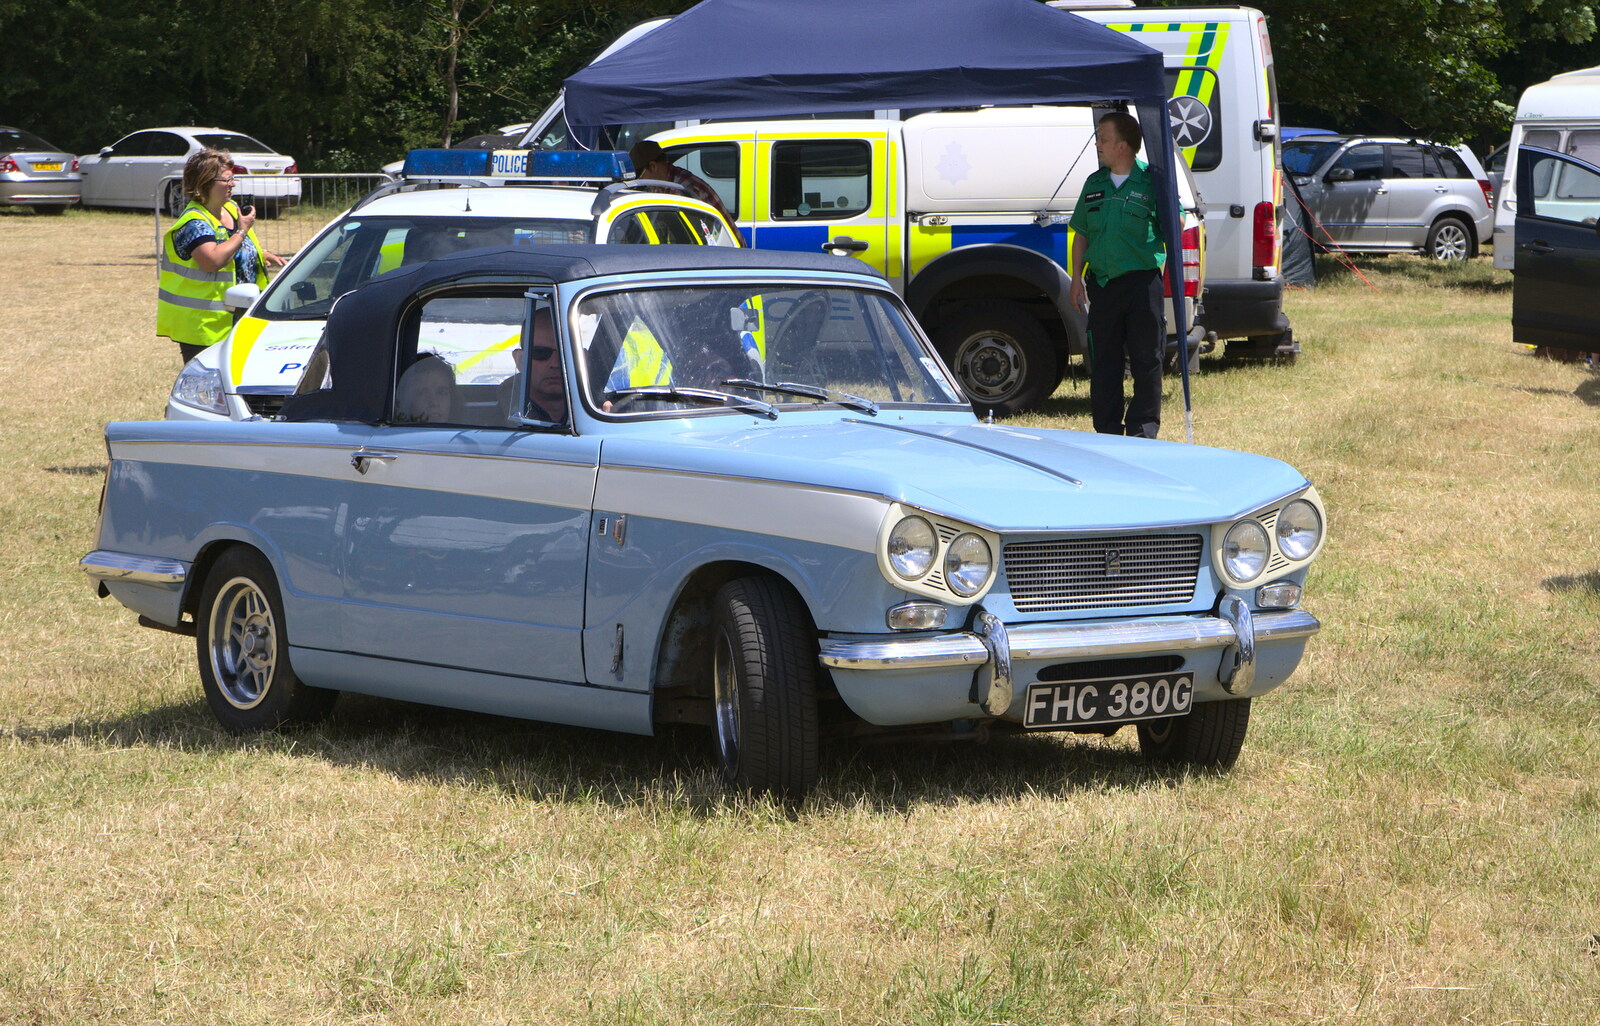 A Triumph Herald from A Vintage Tractorey Sort of Day, Palgrave, Suffolk - 21st June 2015